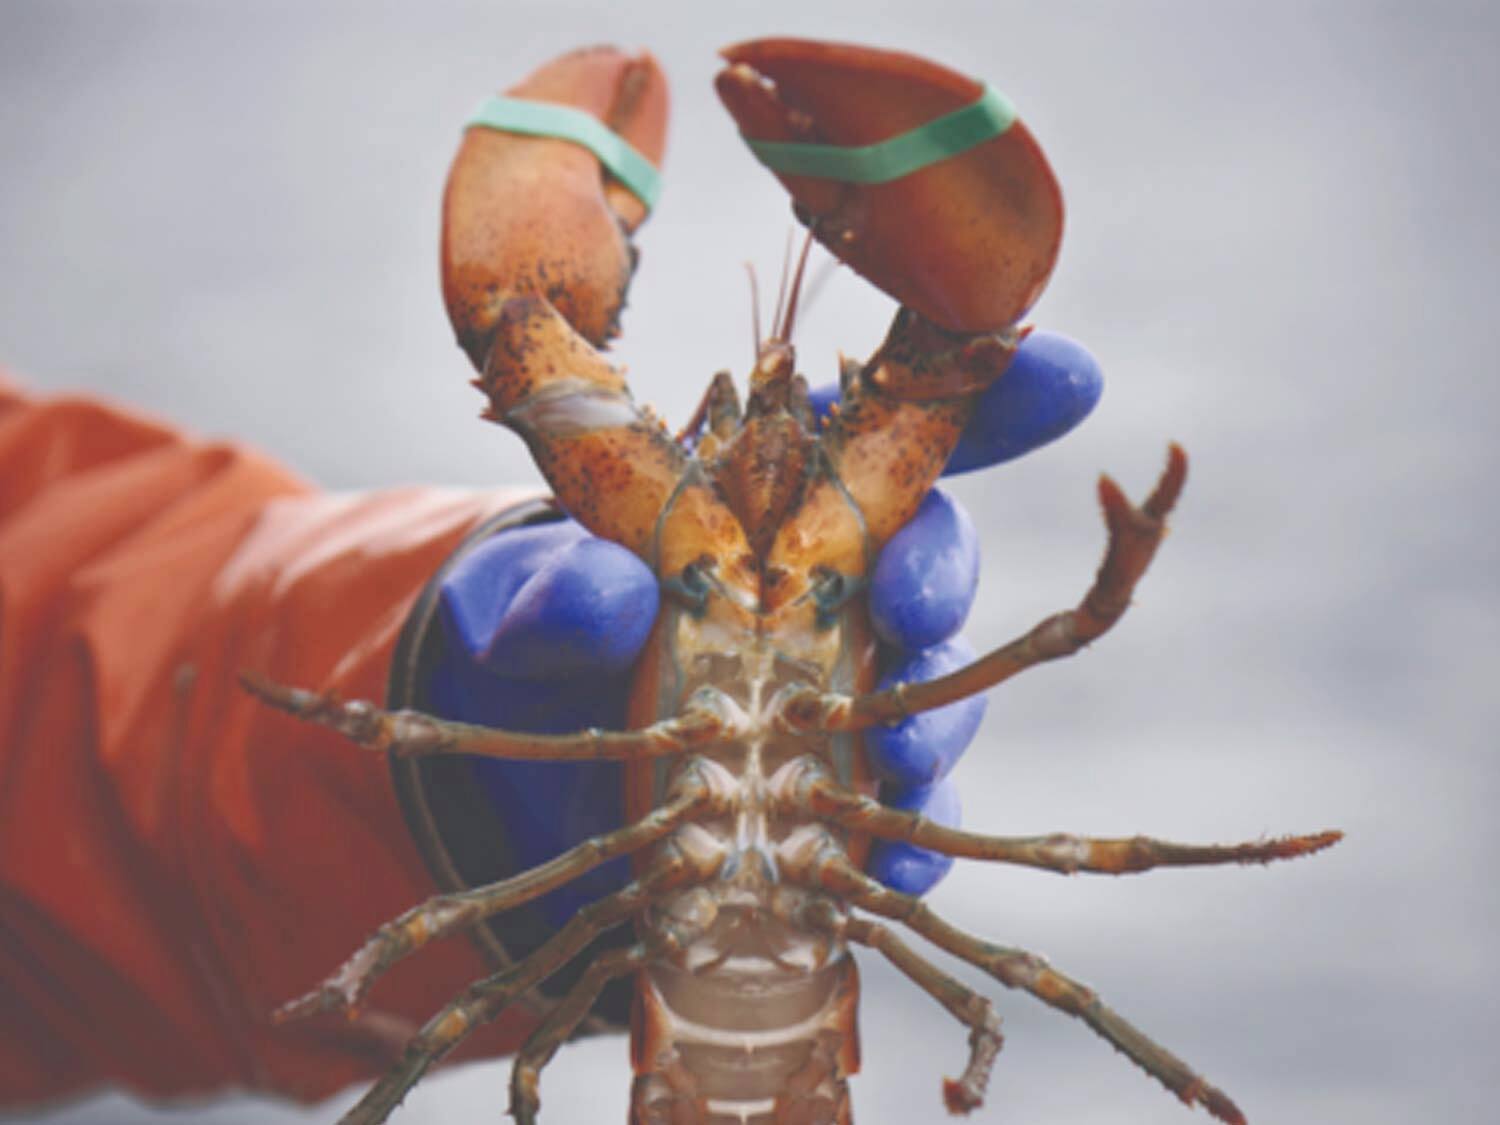 A sustainable journey into the world of maine lobster fishing